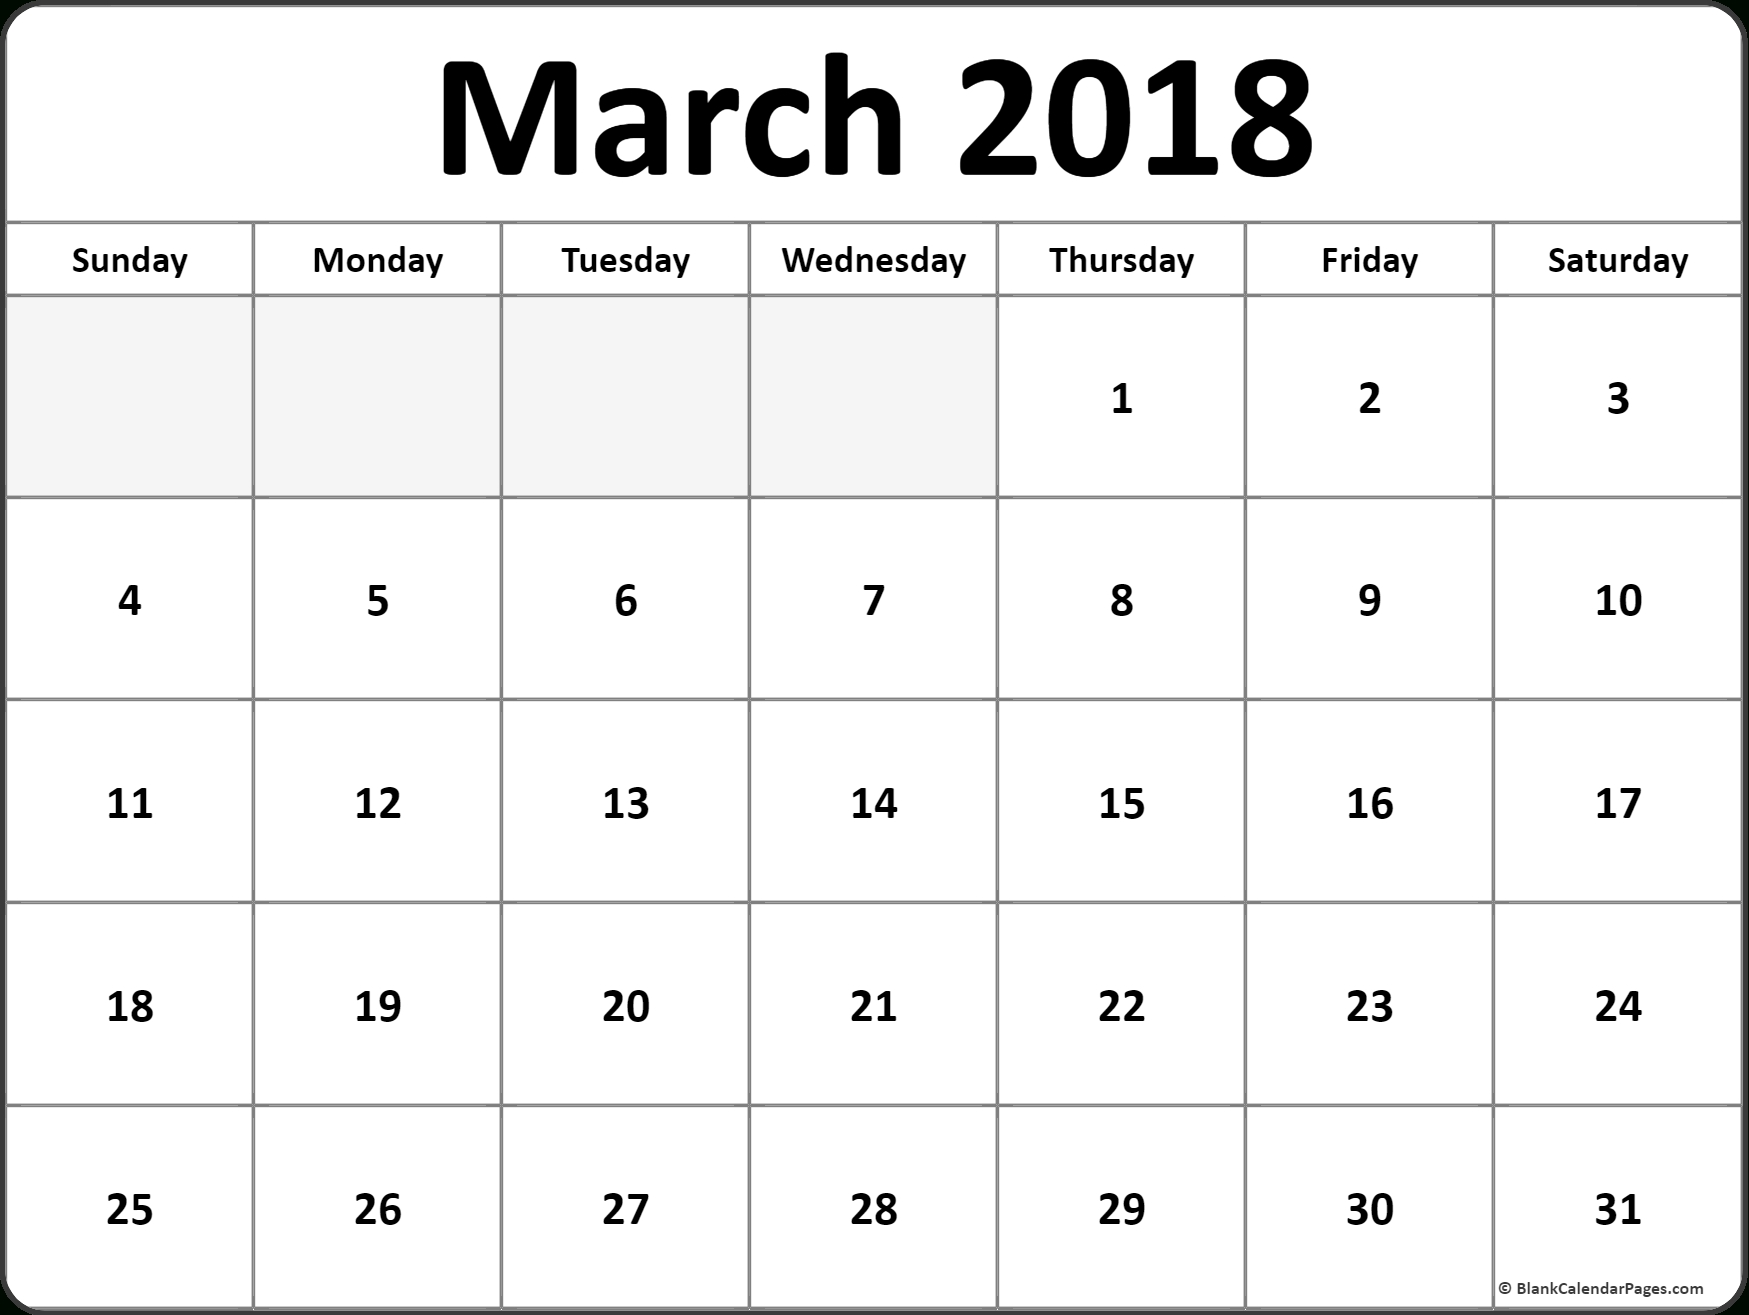 March 2018 Monthly Calendar Printout #march #printable #calendar Calendar By Month To Print